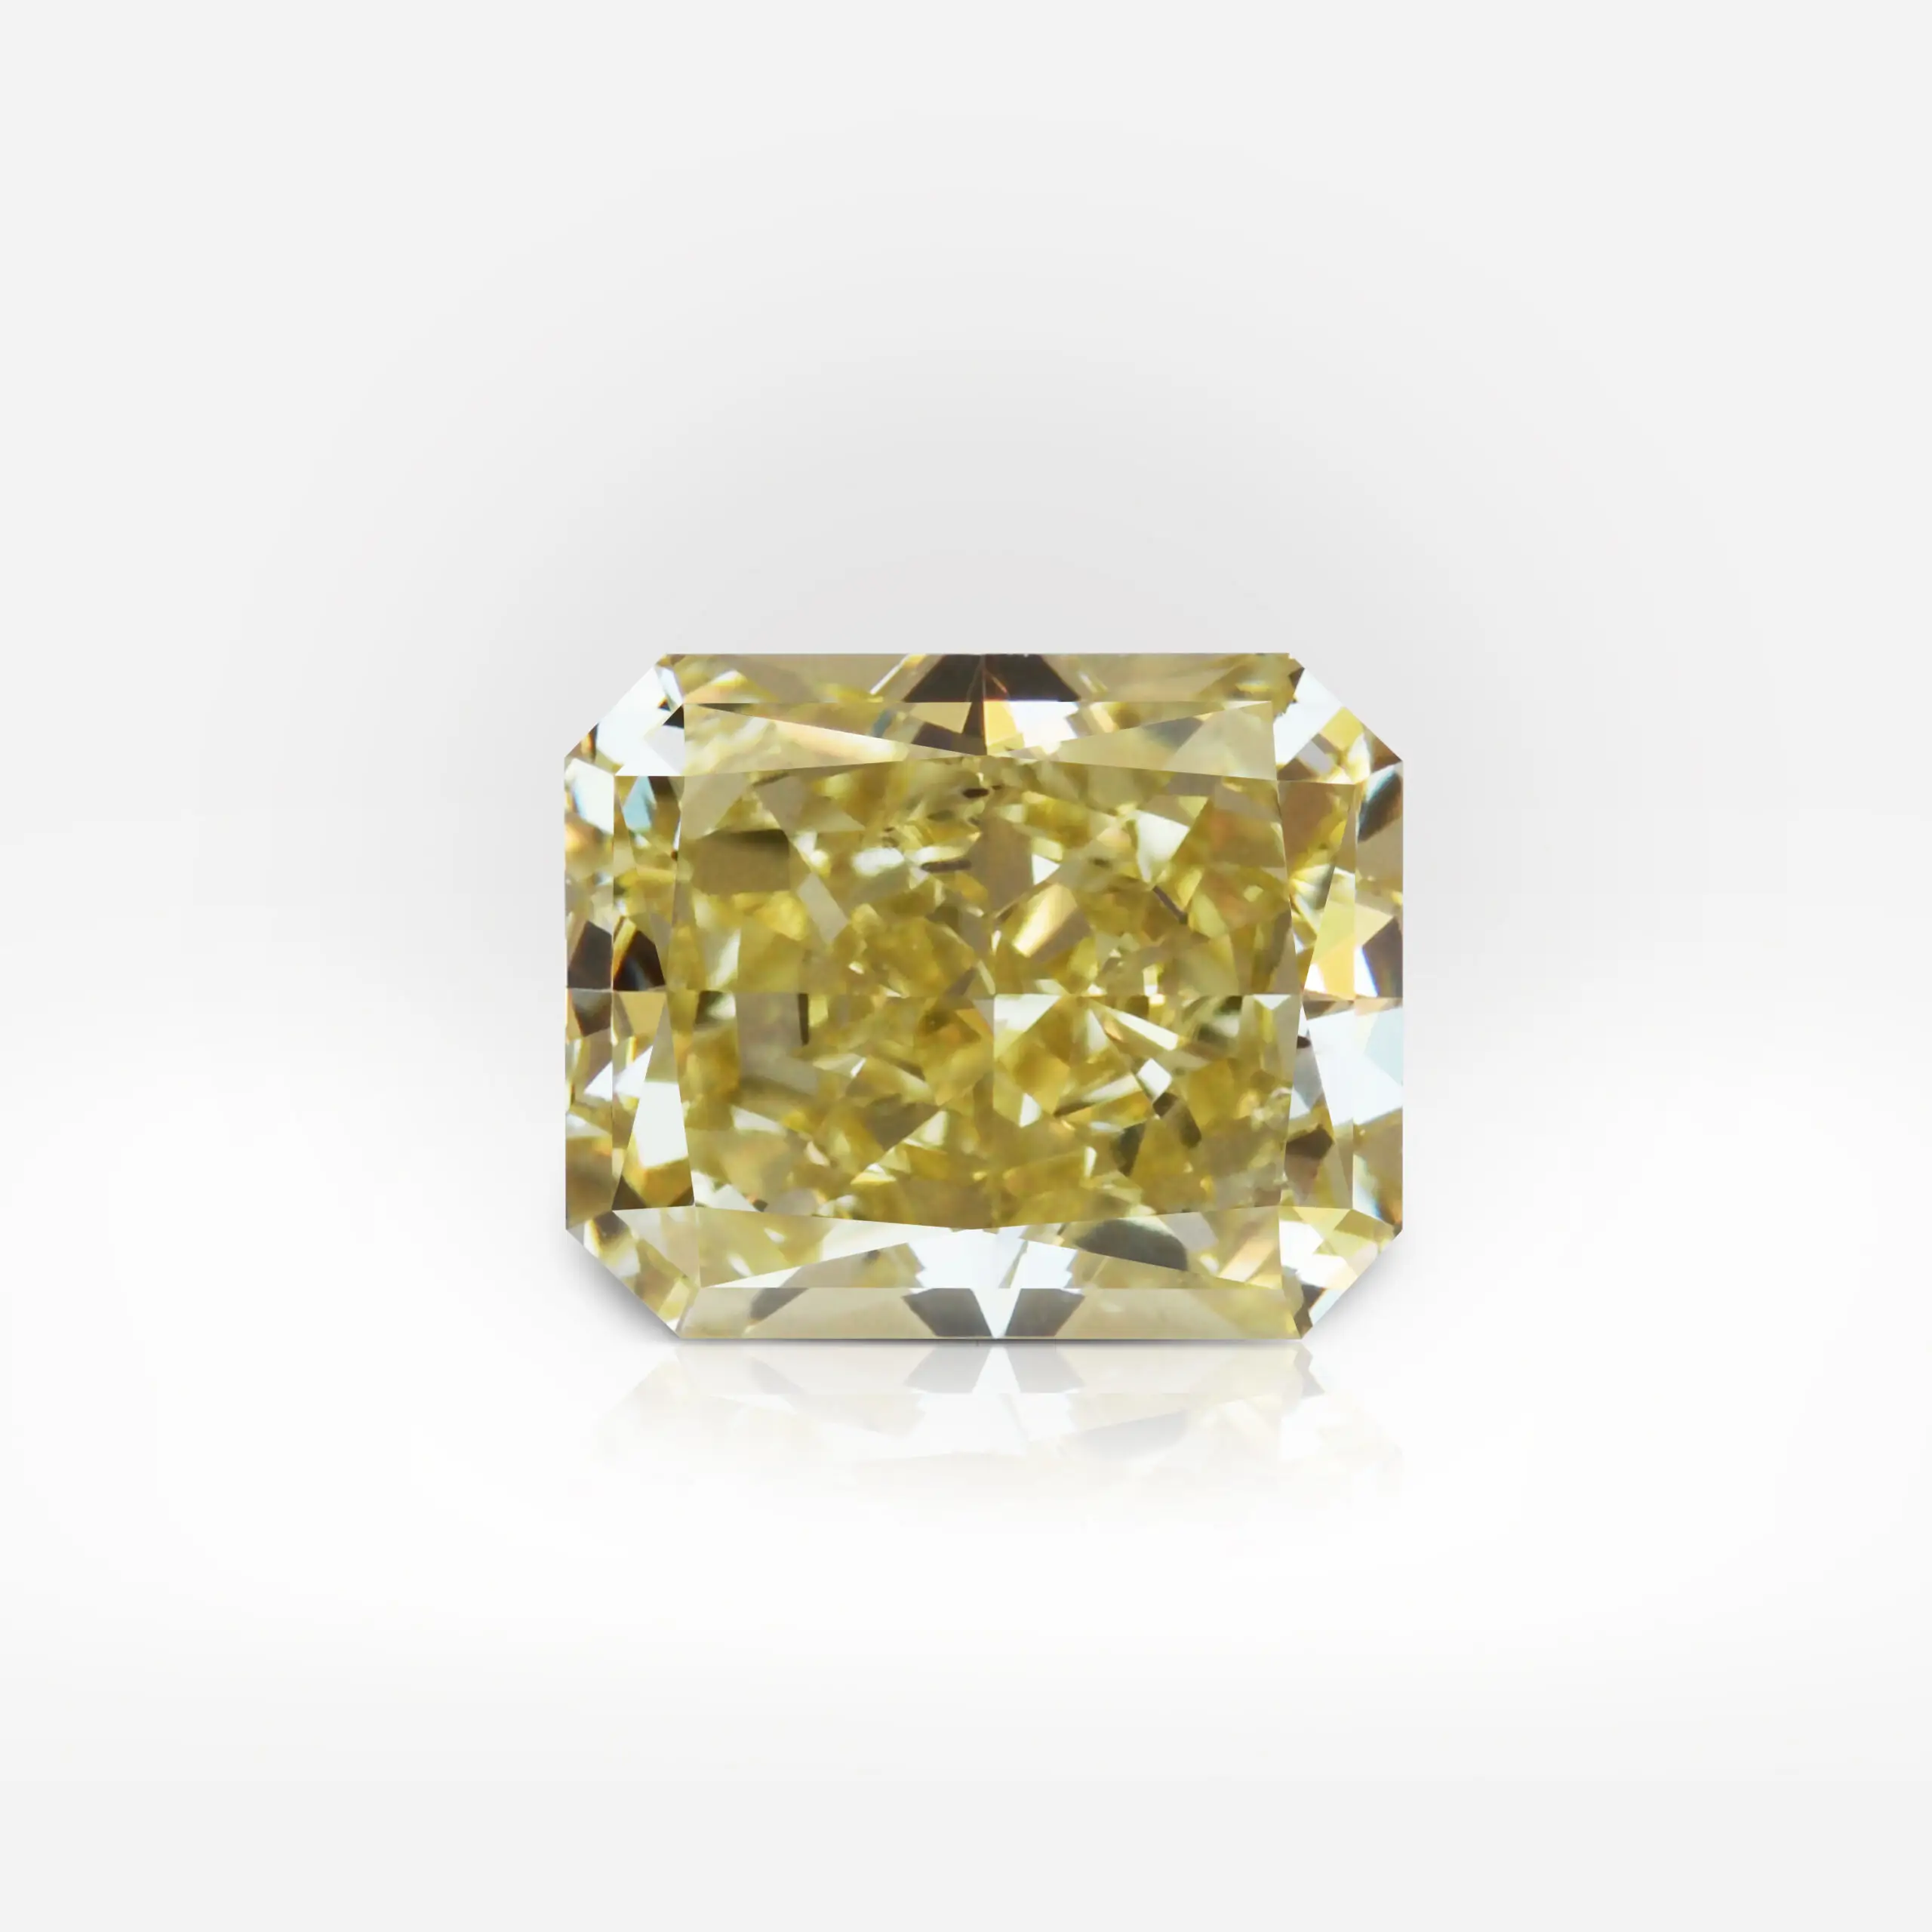 1.04 carat Fancy Yellow SI1 Radiant Shape Diamond GIA - picture 1